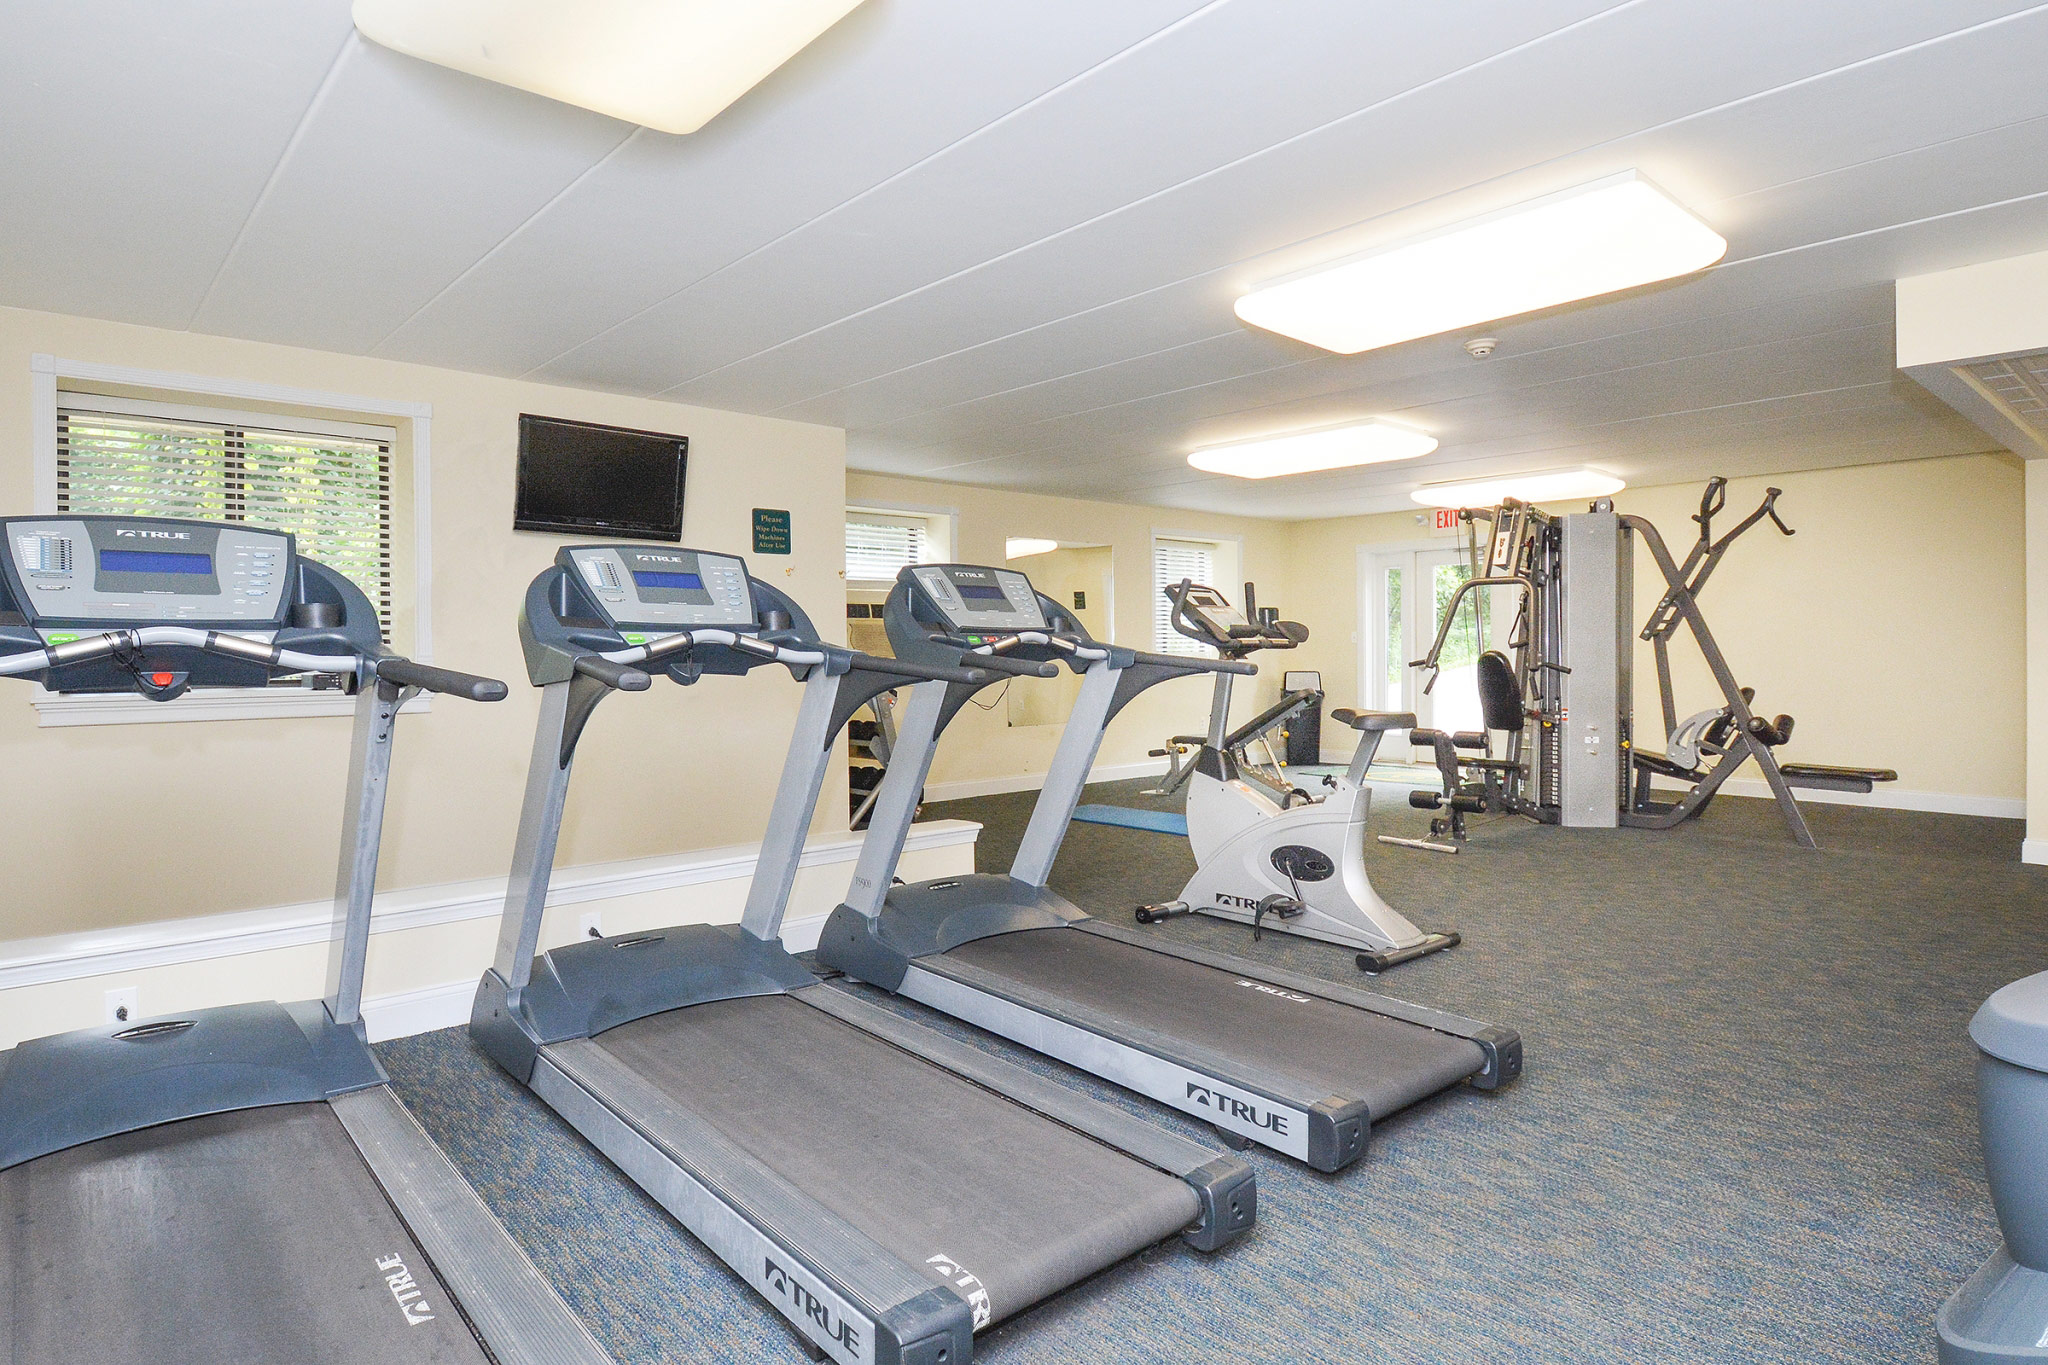 Area of our Fitness center in our community, fitted with fitness machines, soft flooring, and a high ceiling